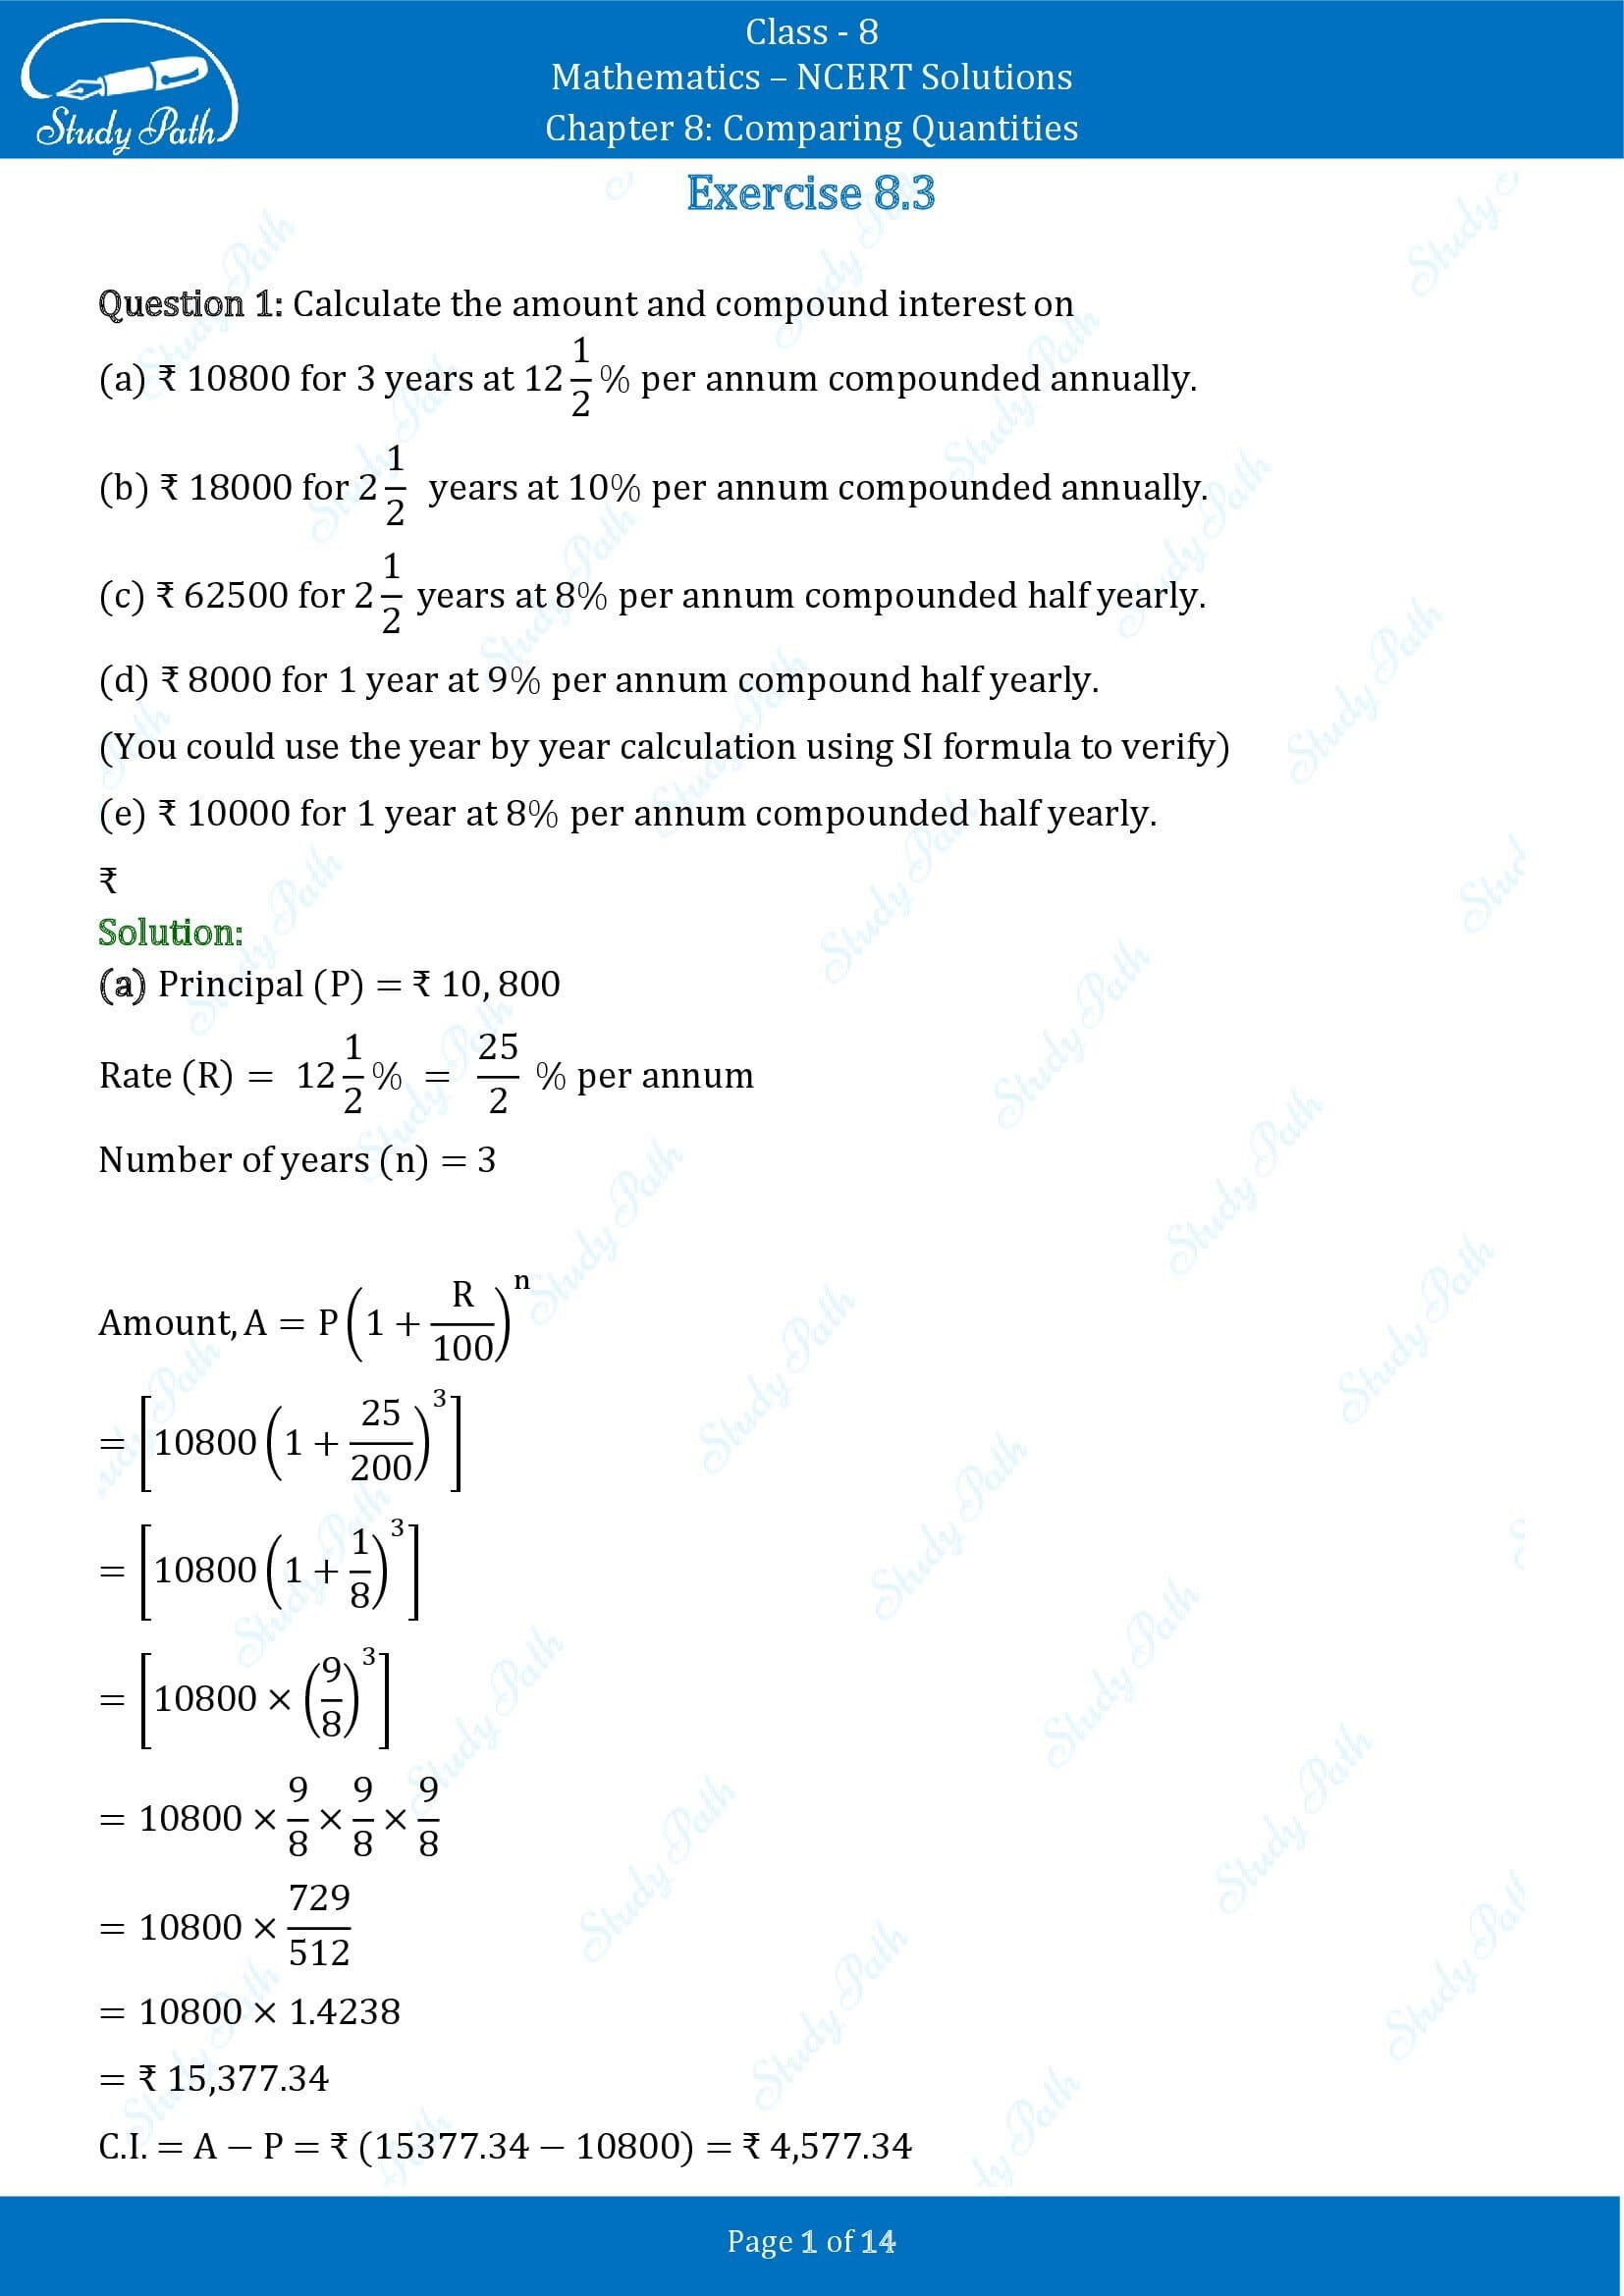 NCERT Solutions for Class 8 Maths Chapter 8 Comparing Quantities Exercise 8.3 00001